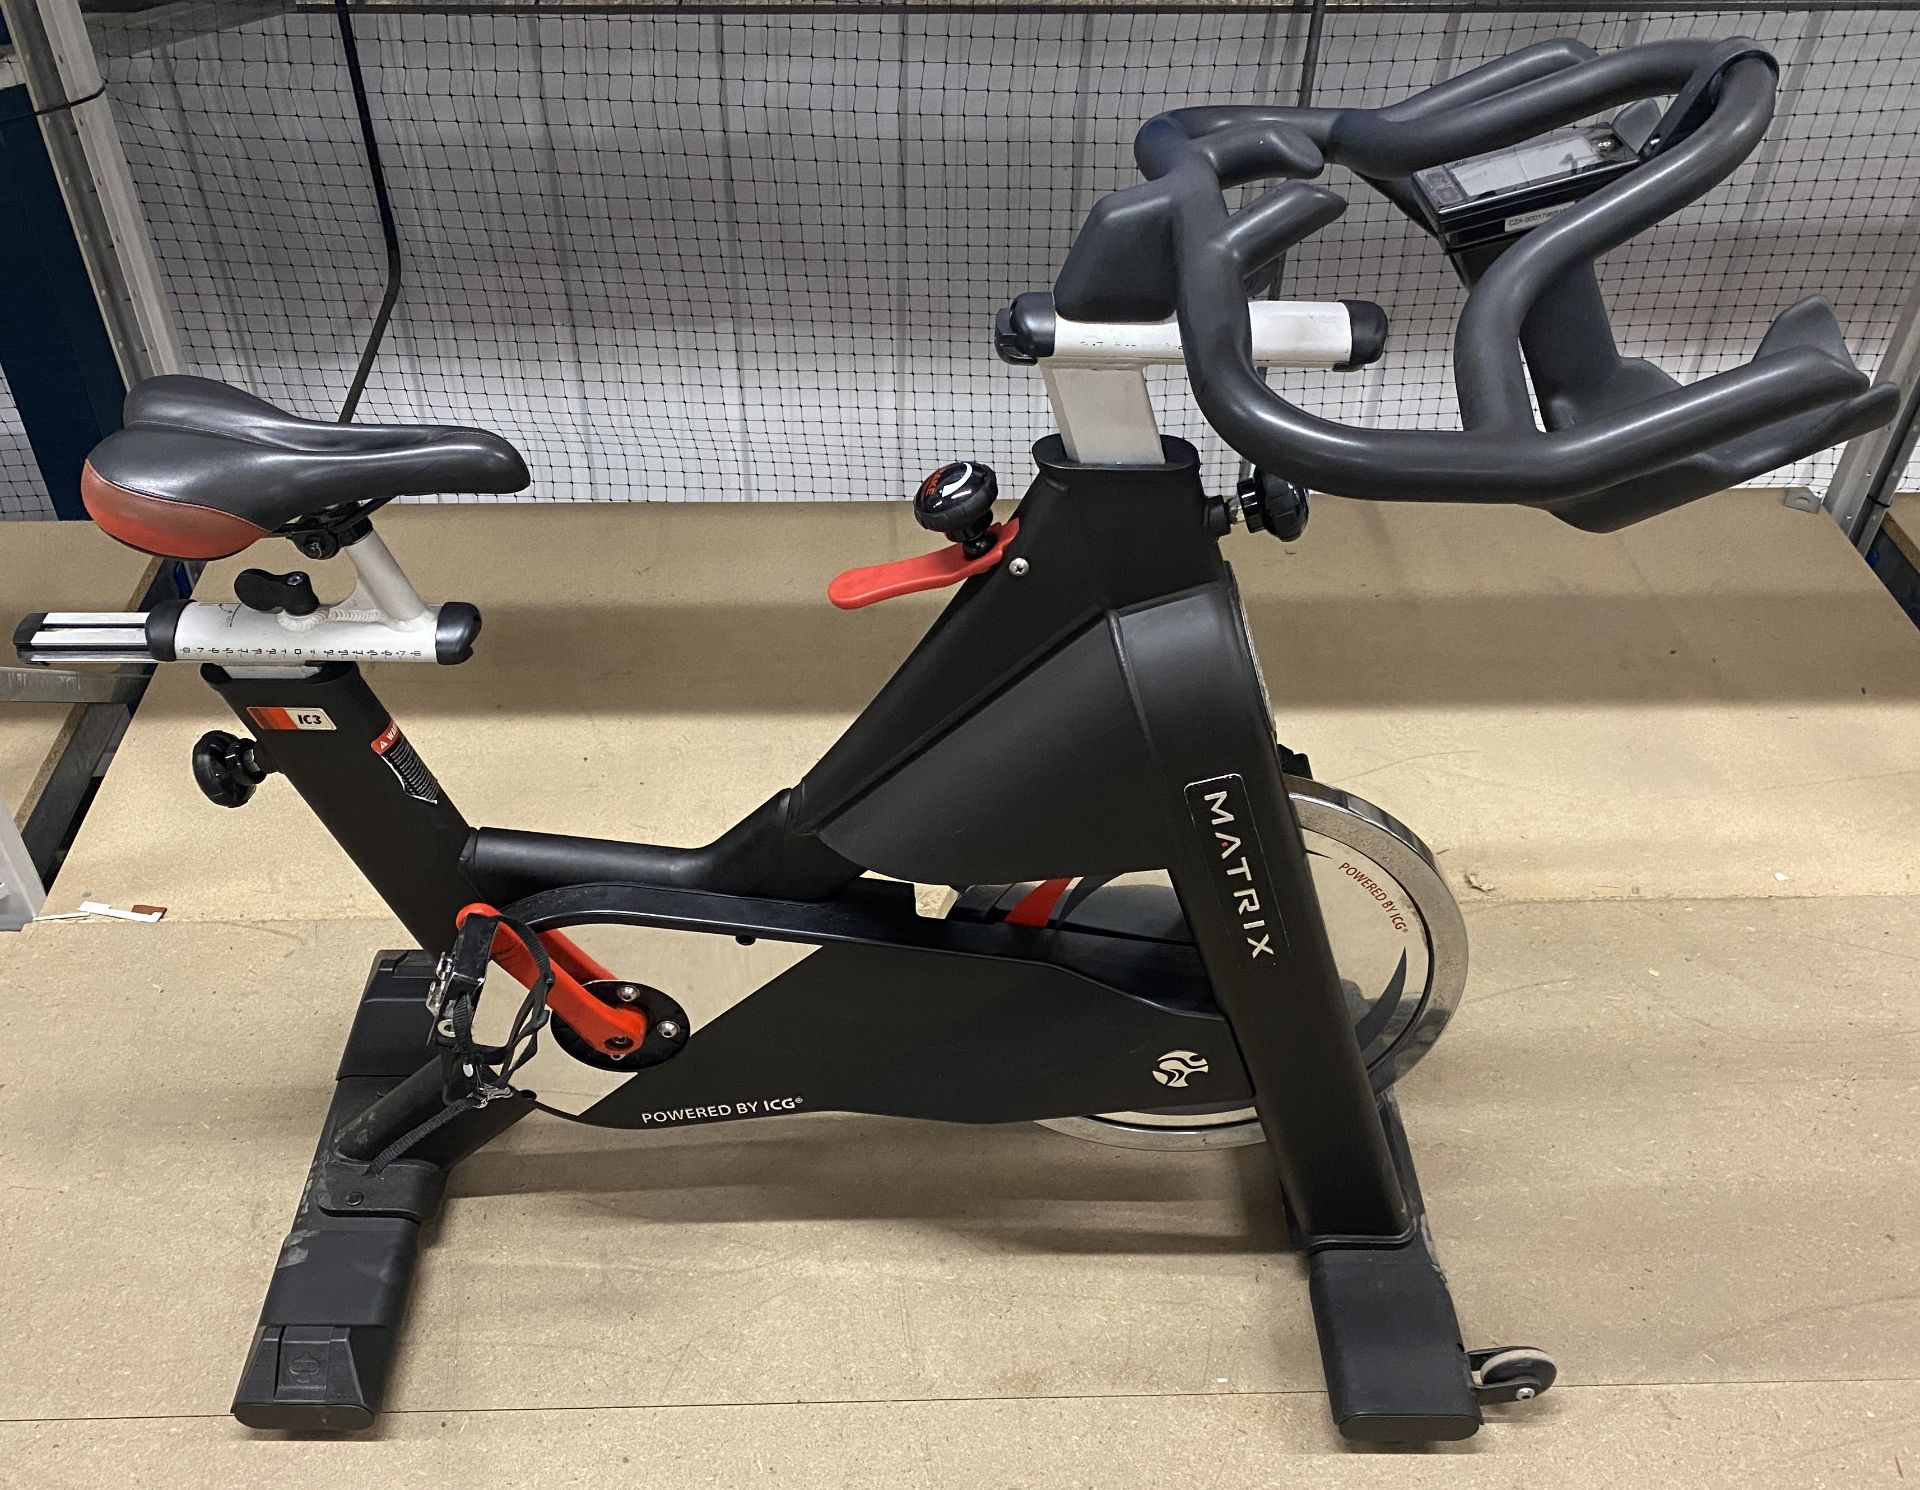 Matrix IC3 'Powered by ICG' Spin Bike - Image 4 of 7